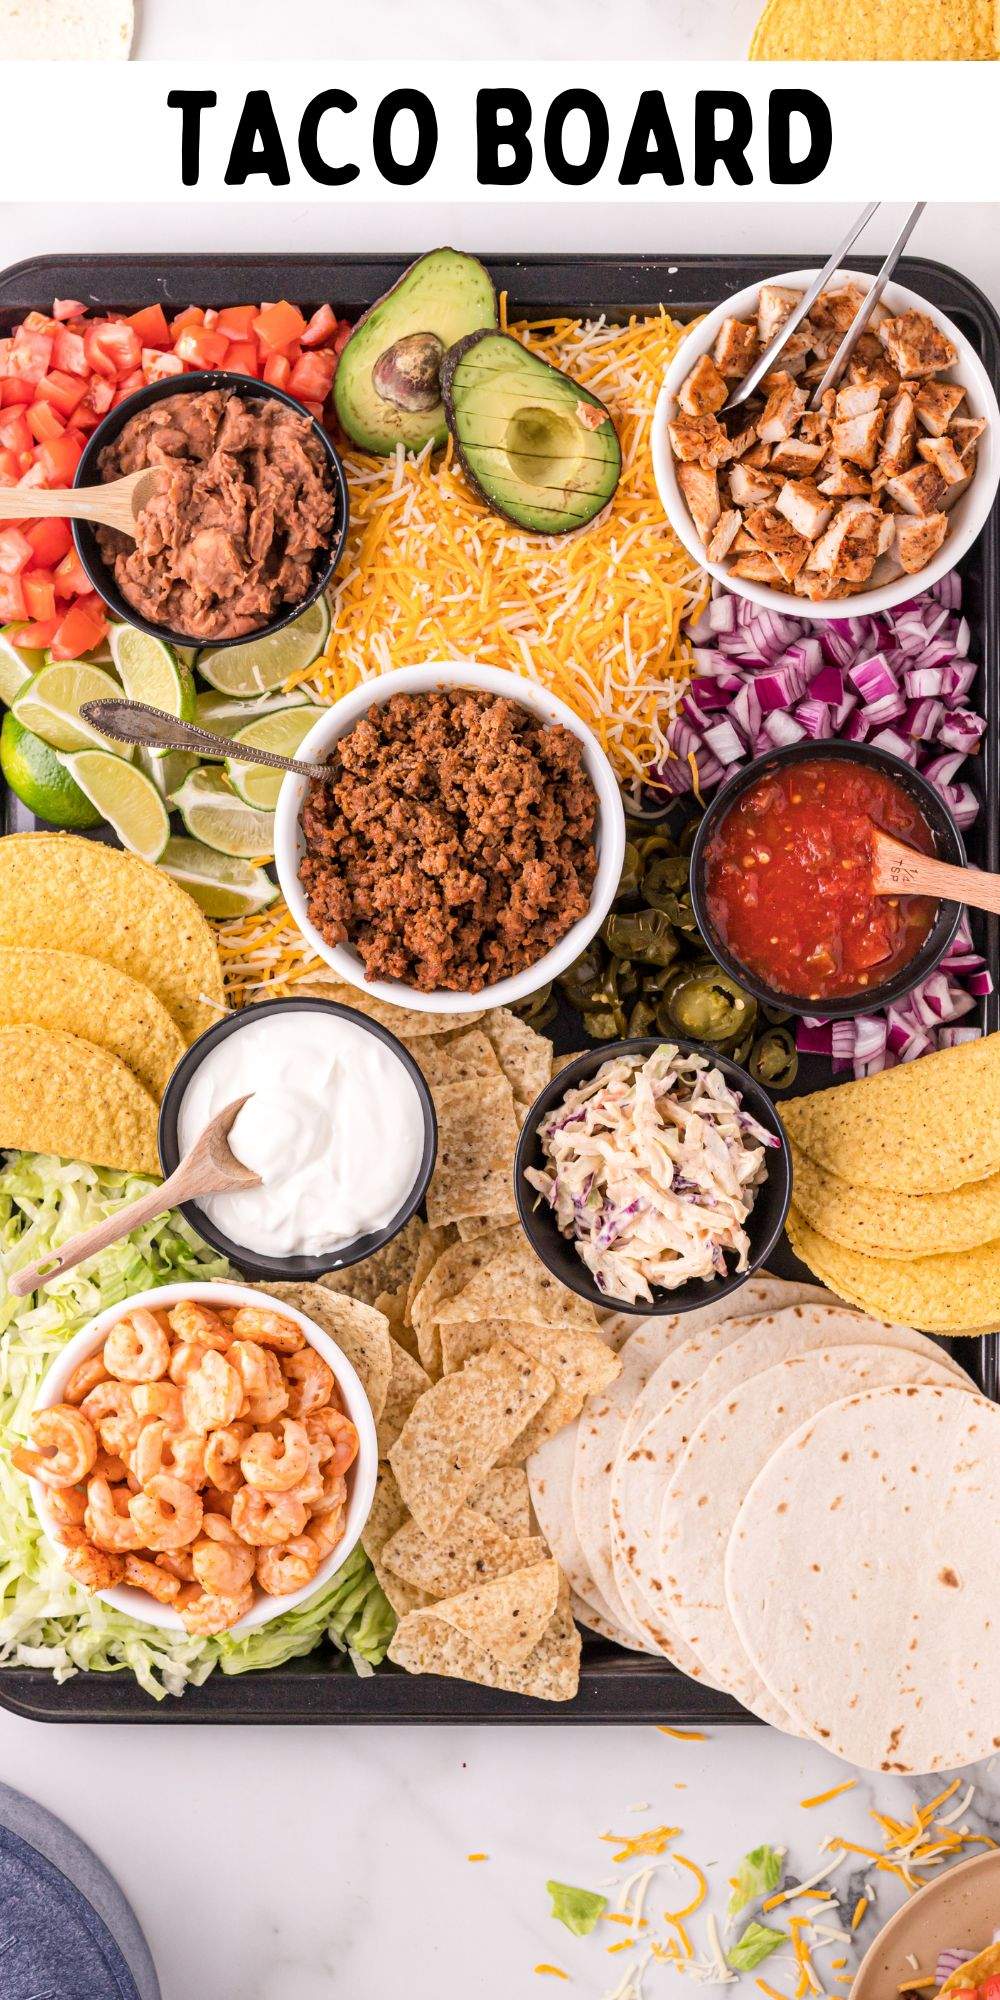 It's taco night, and this is the way to build your own taco board that everyone can gather around. A perfect themed charcuterie dinner board. via @familyfresh